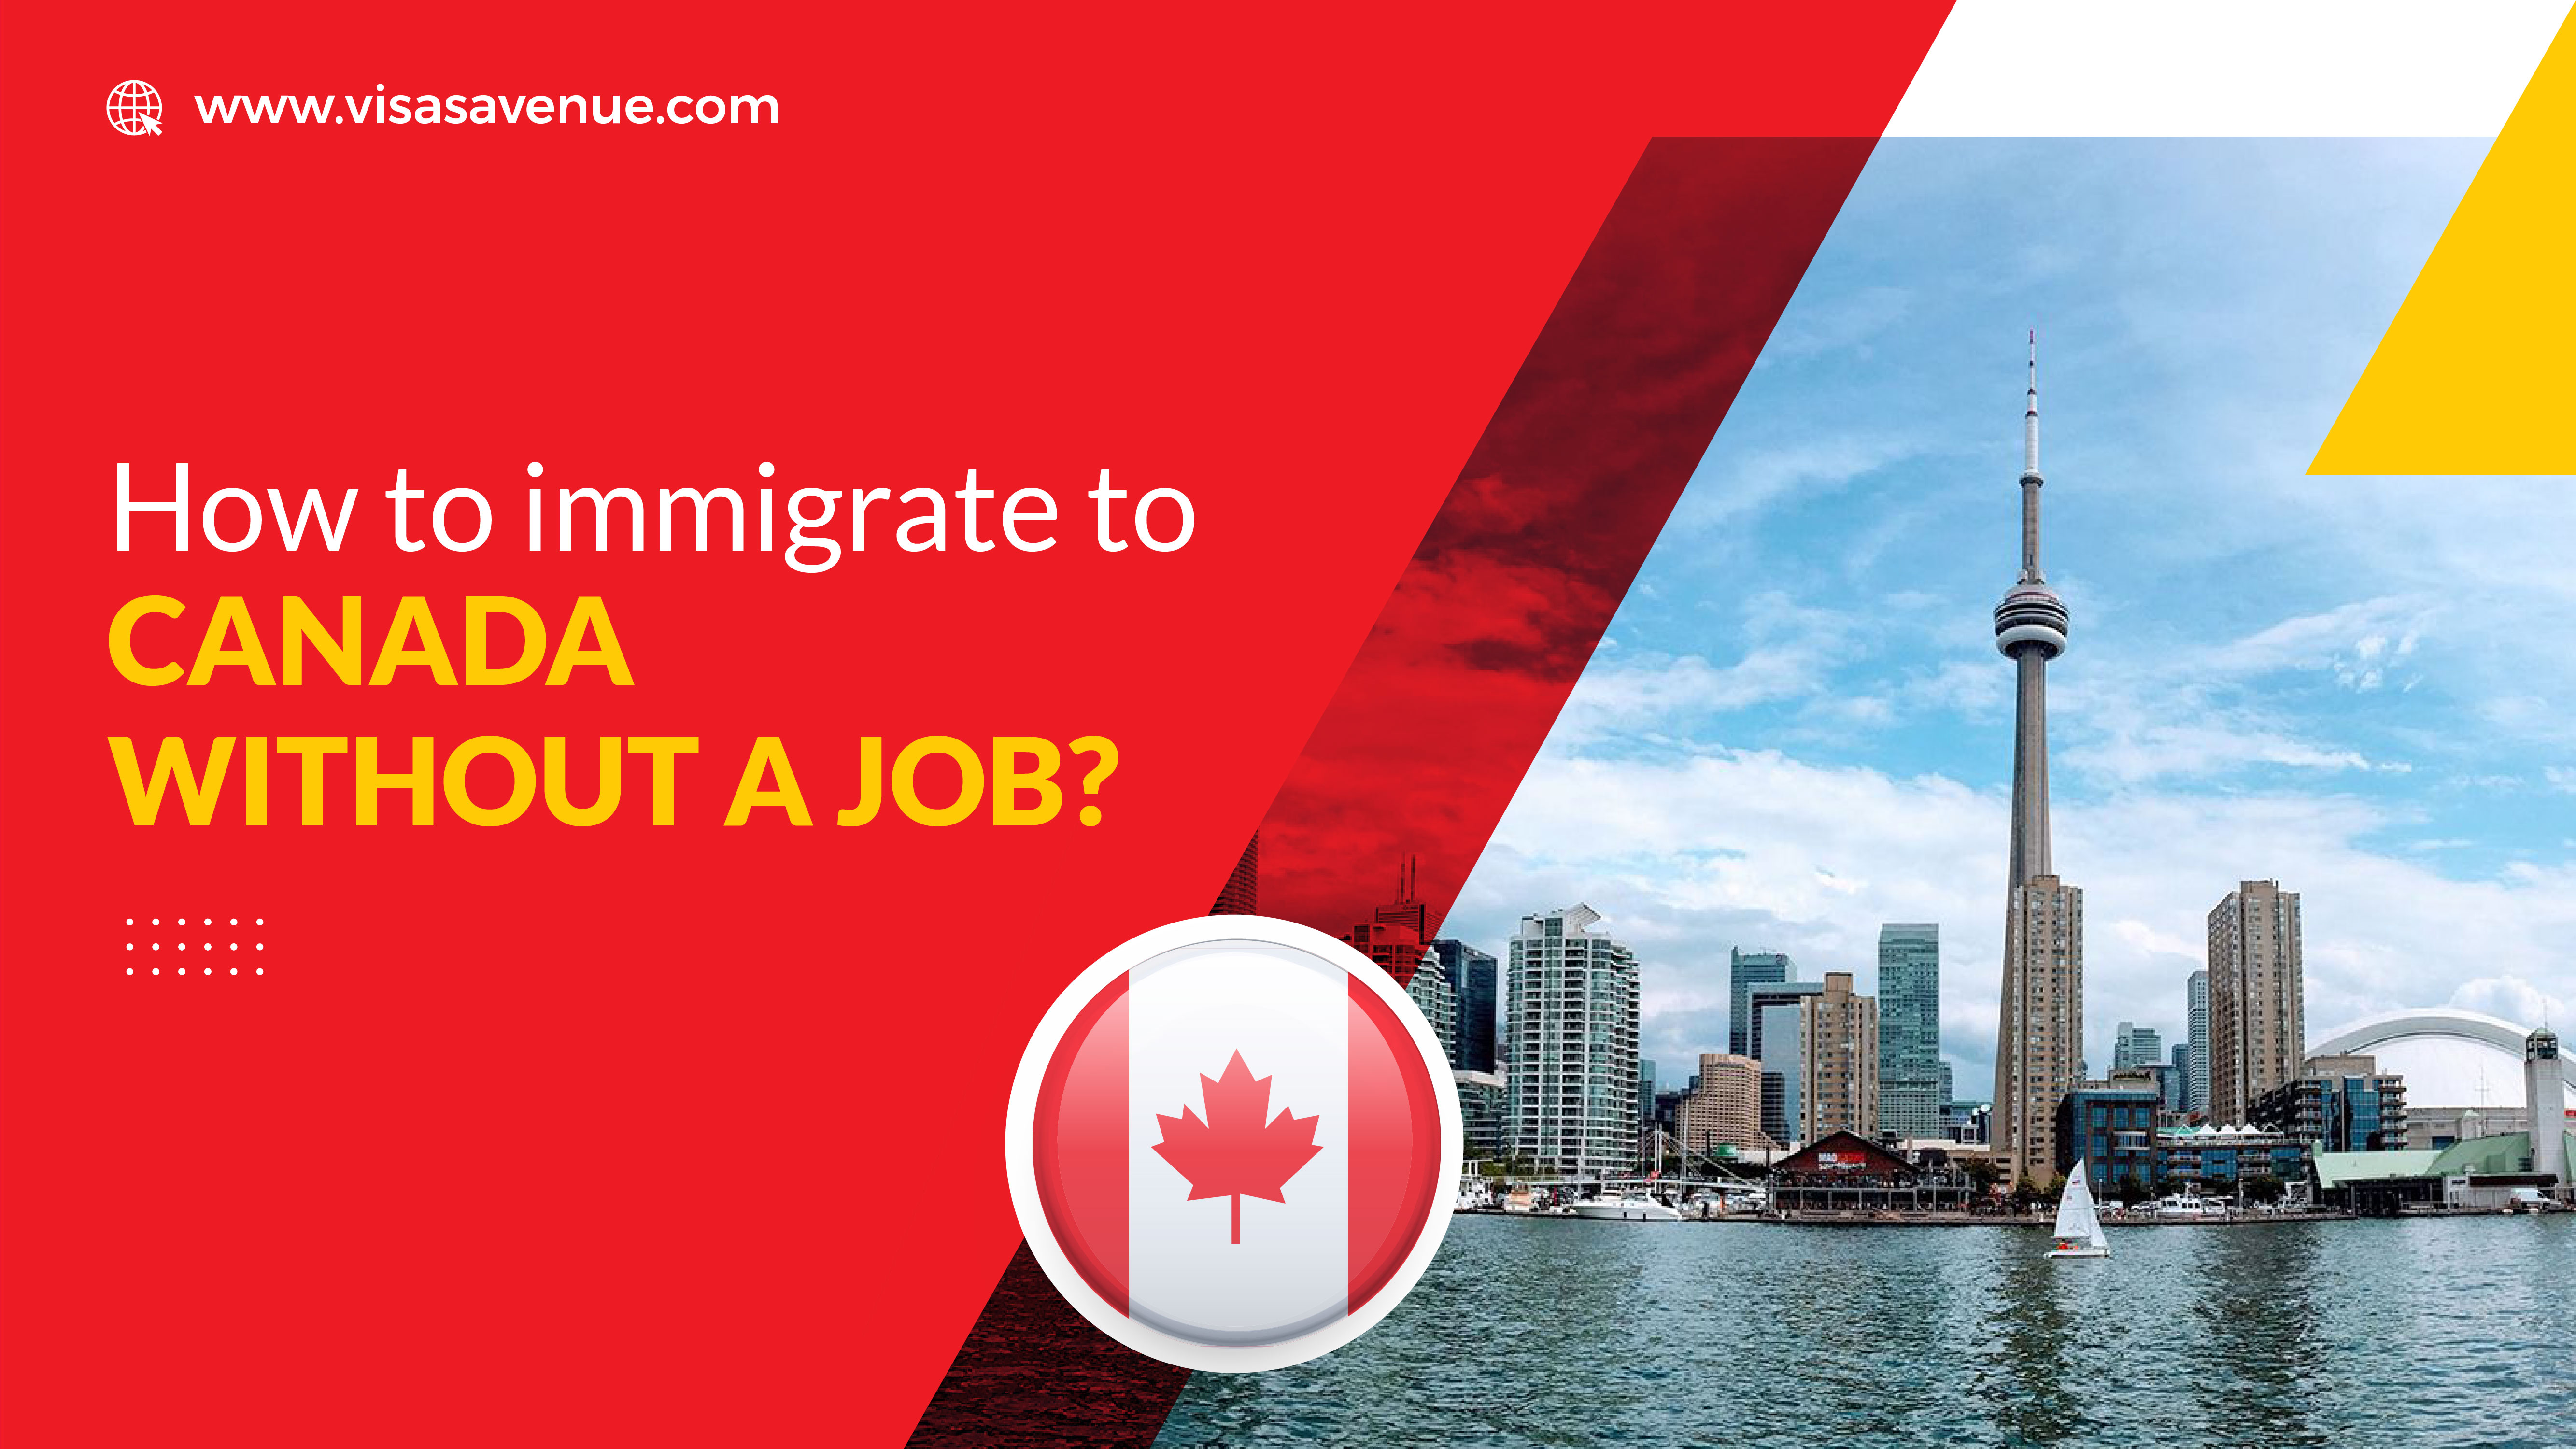 How to immigrate to Canada without a job?